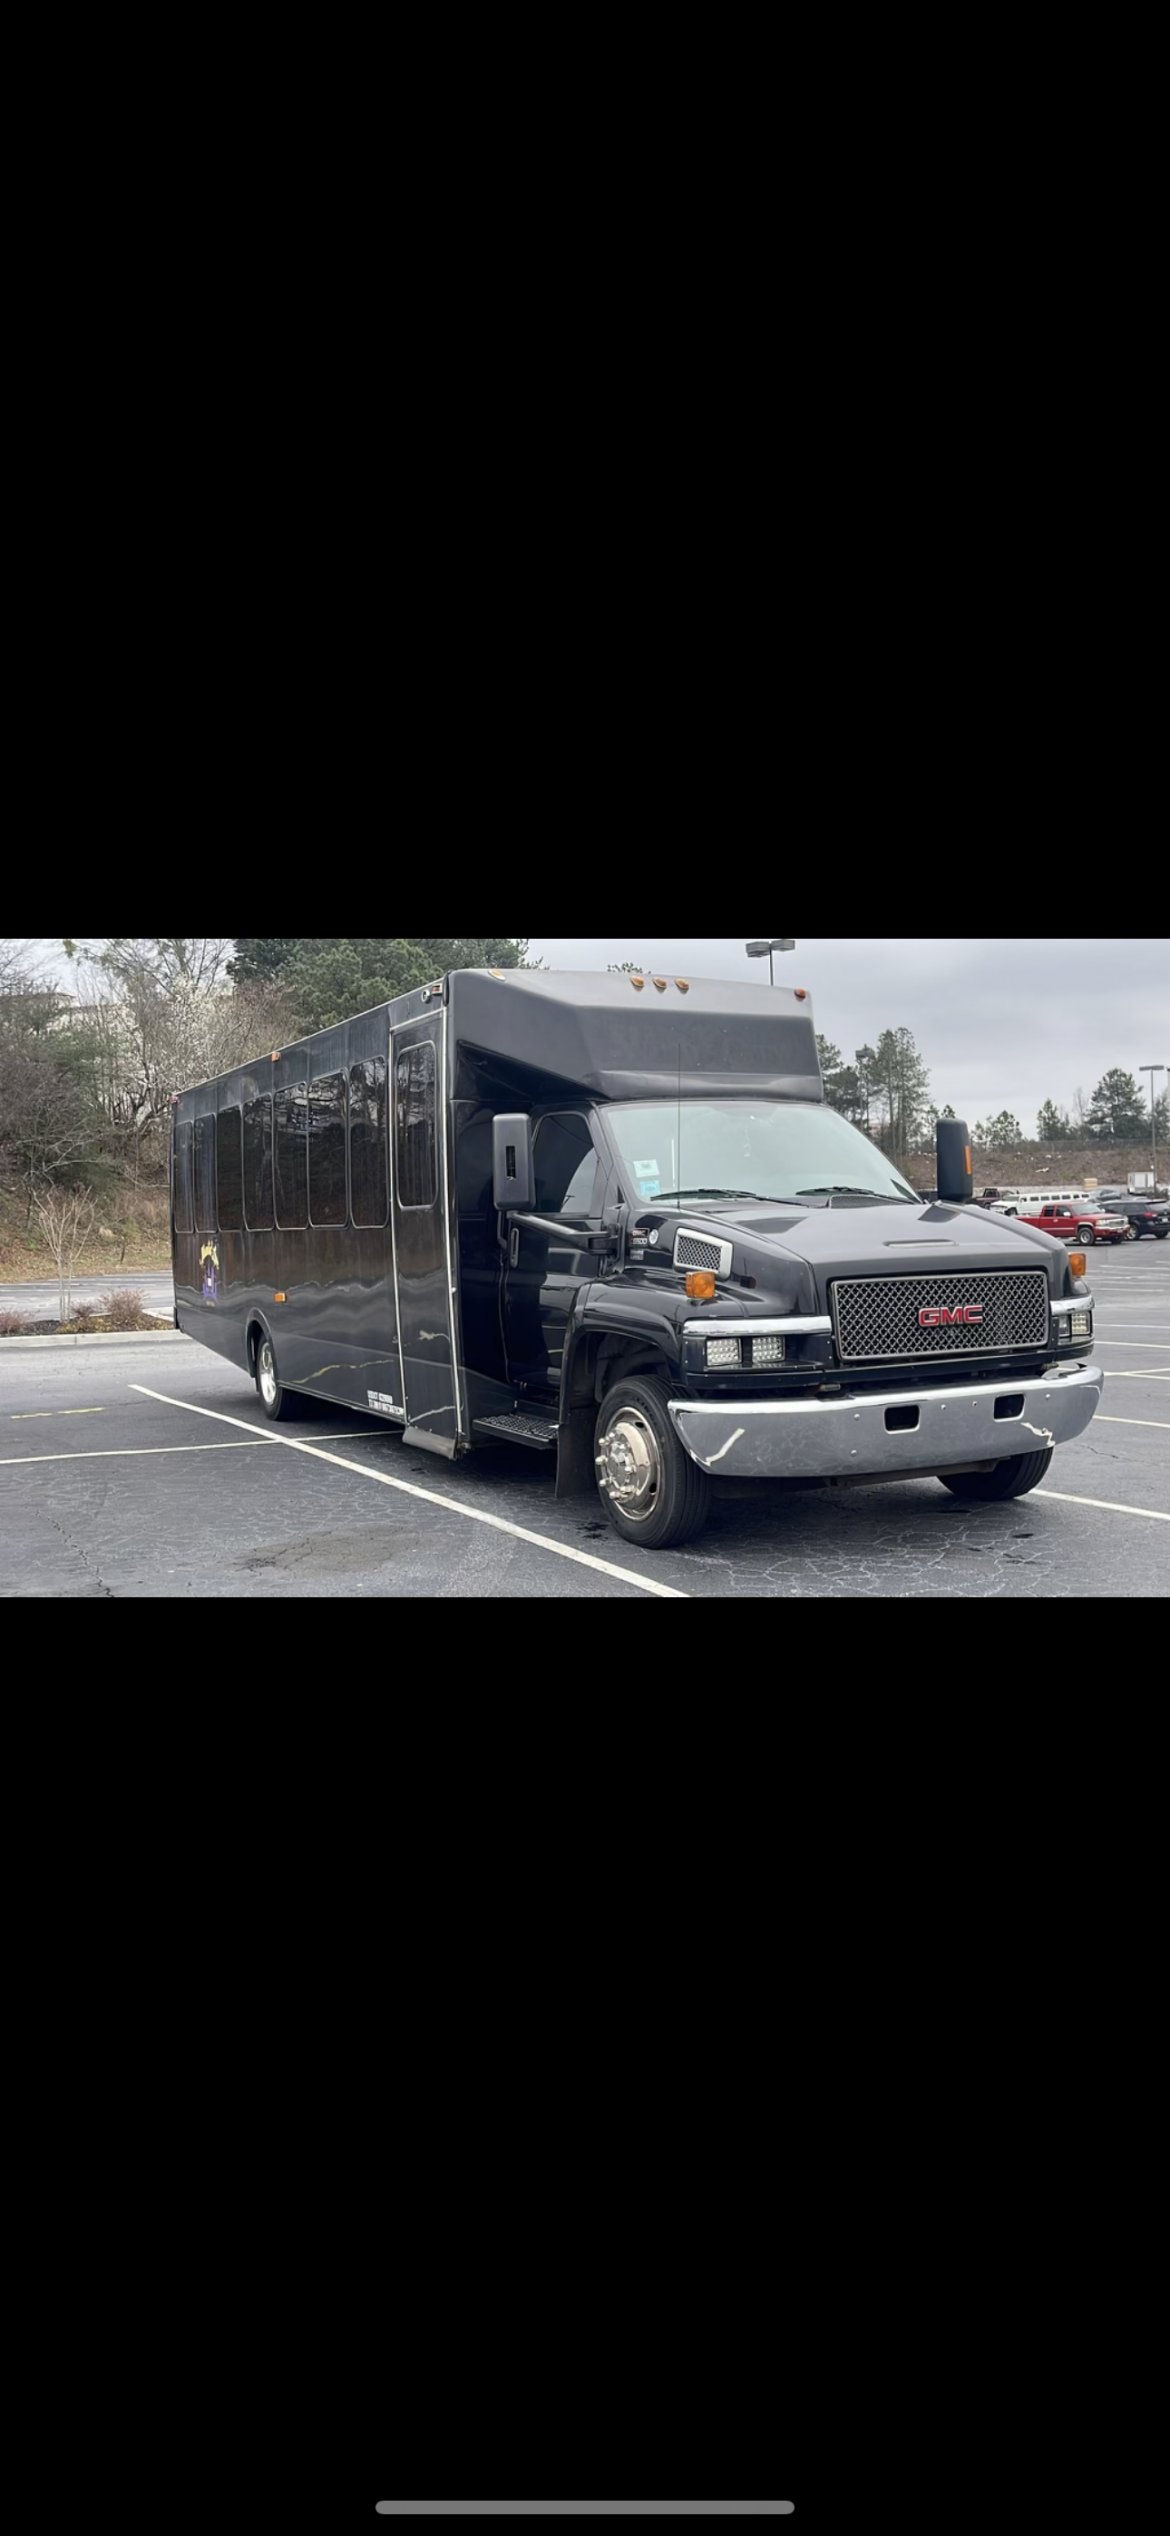 Limo Bus for sale: 2006 GMC 5500